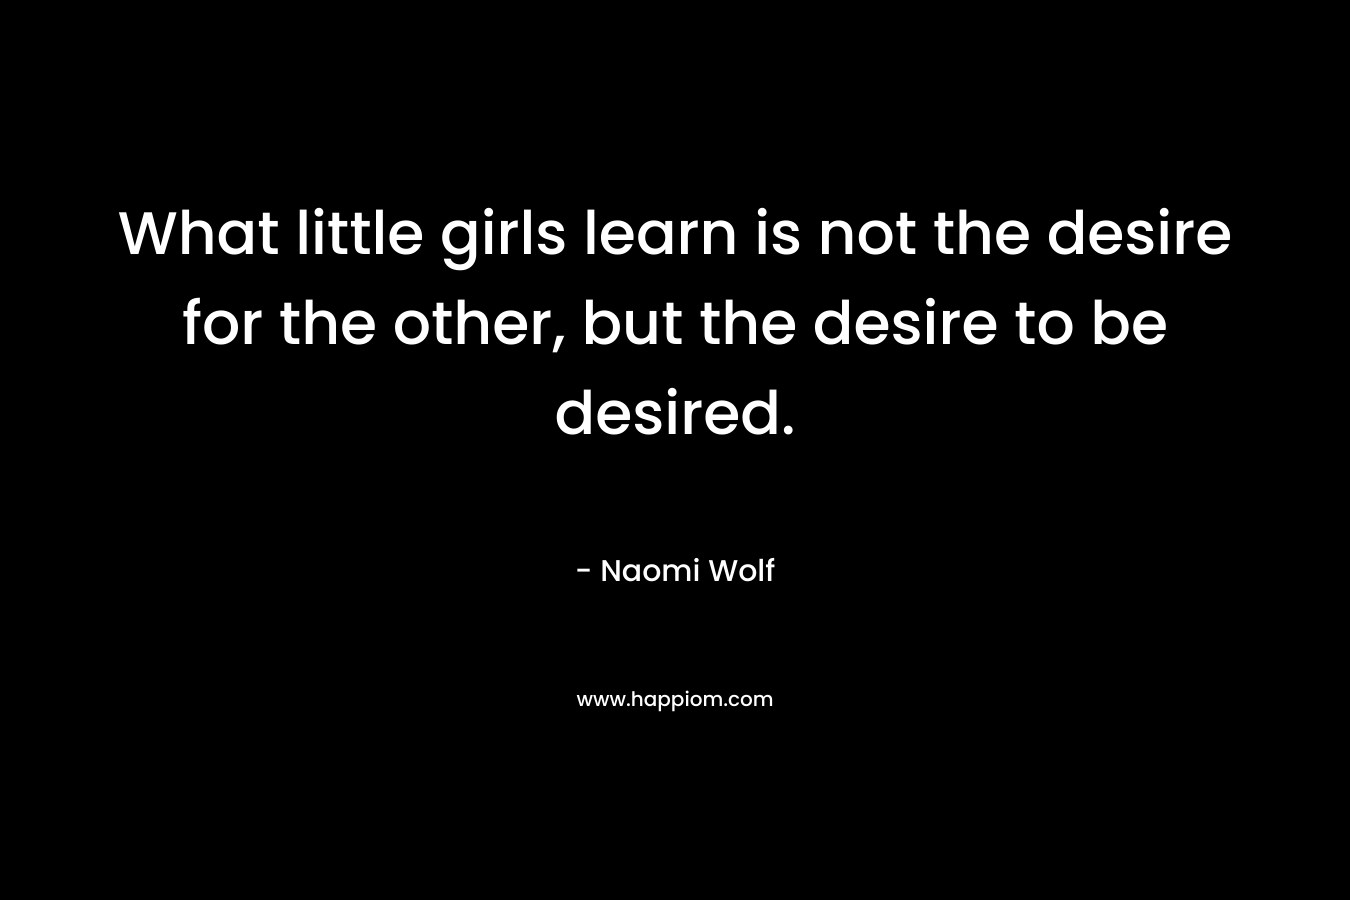 What little girls learn is not the desire for the other, but the desire to be desired. – Naomi Wolf